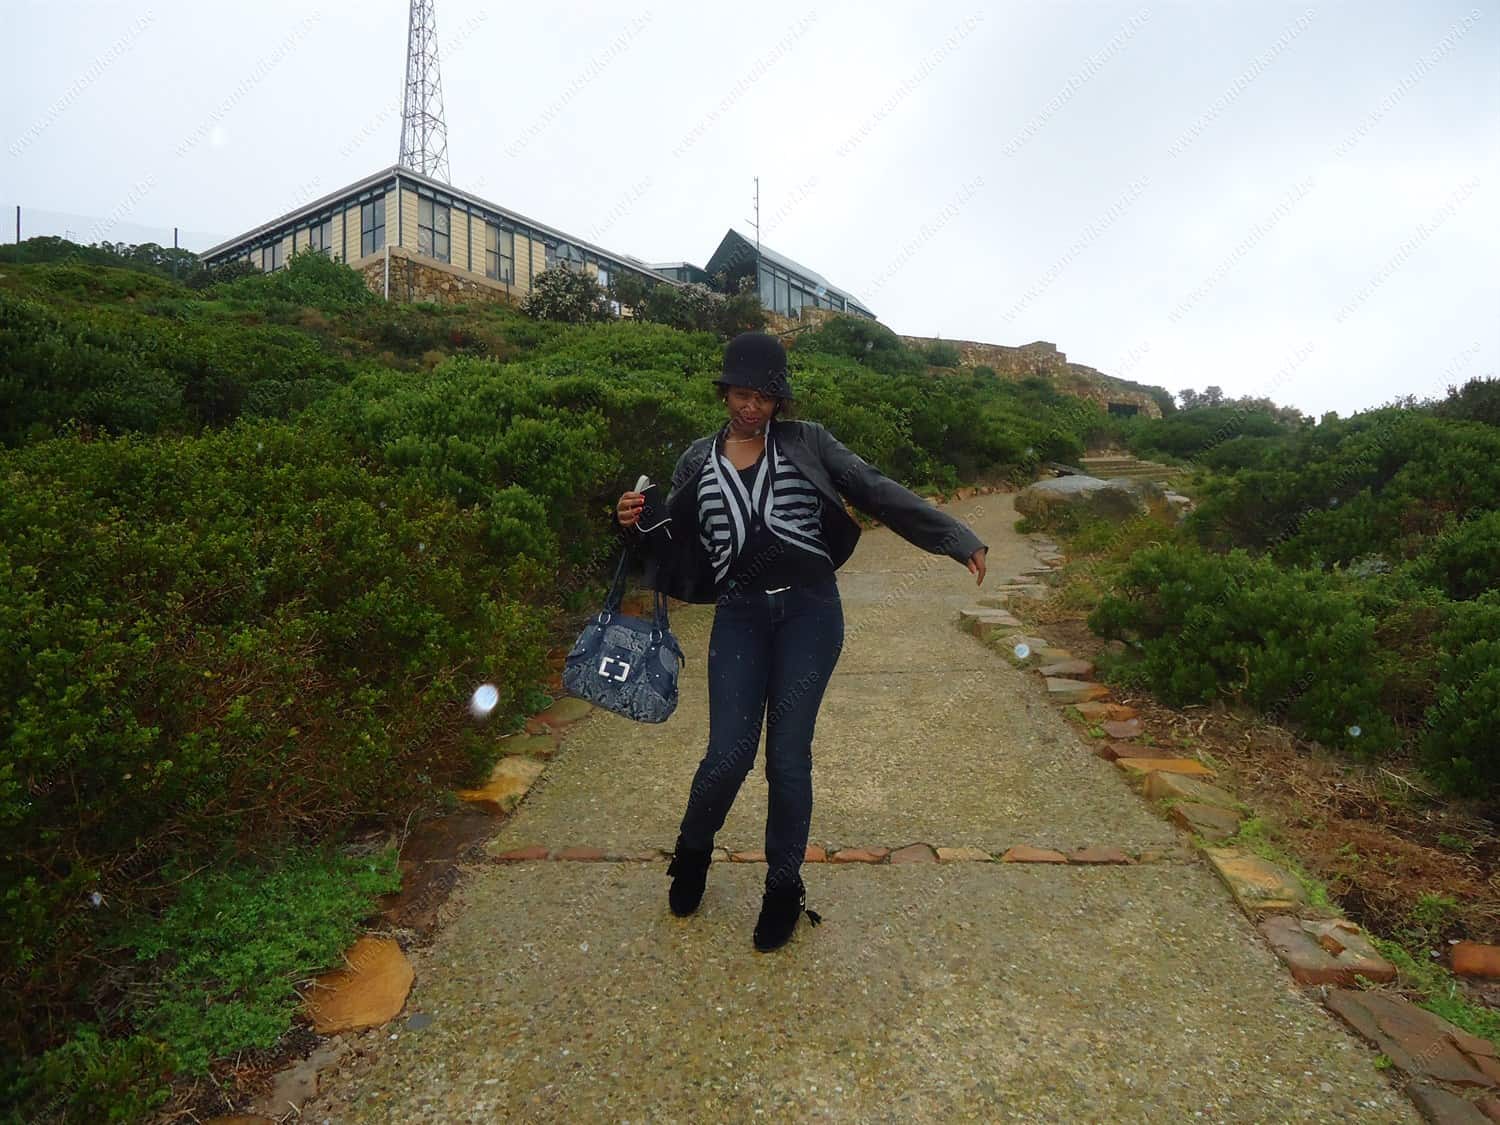 A Road Trip to Cape Point